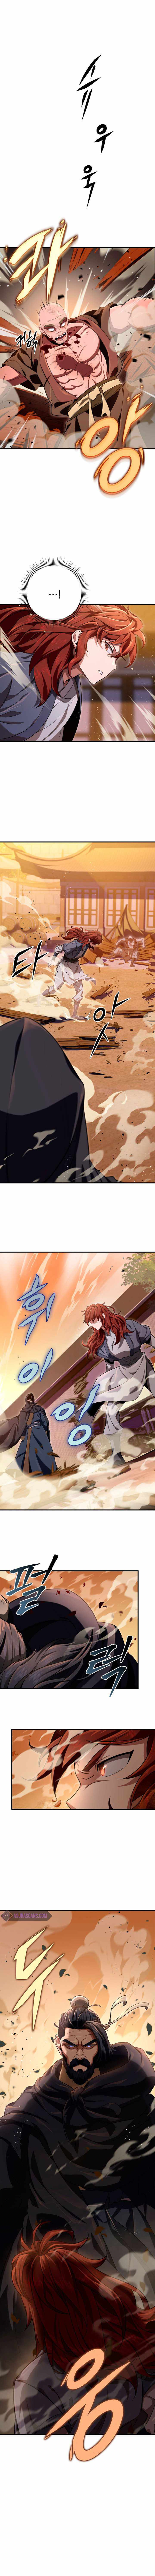 Heavenly Inquisition Sword chapter 16